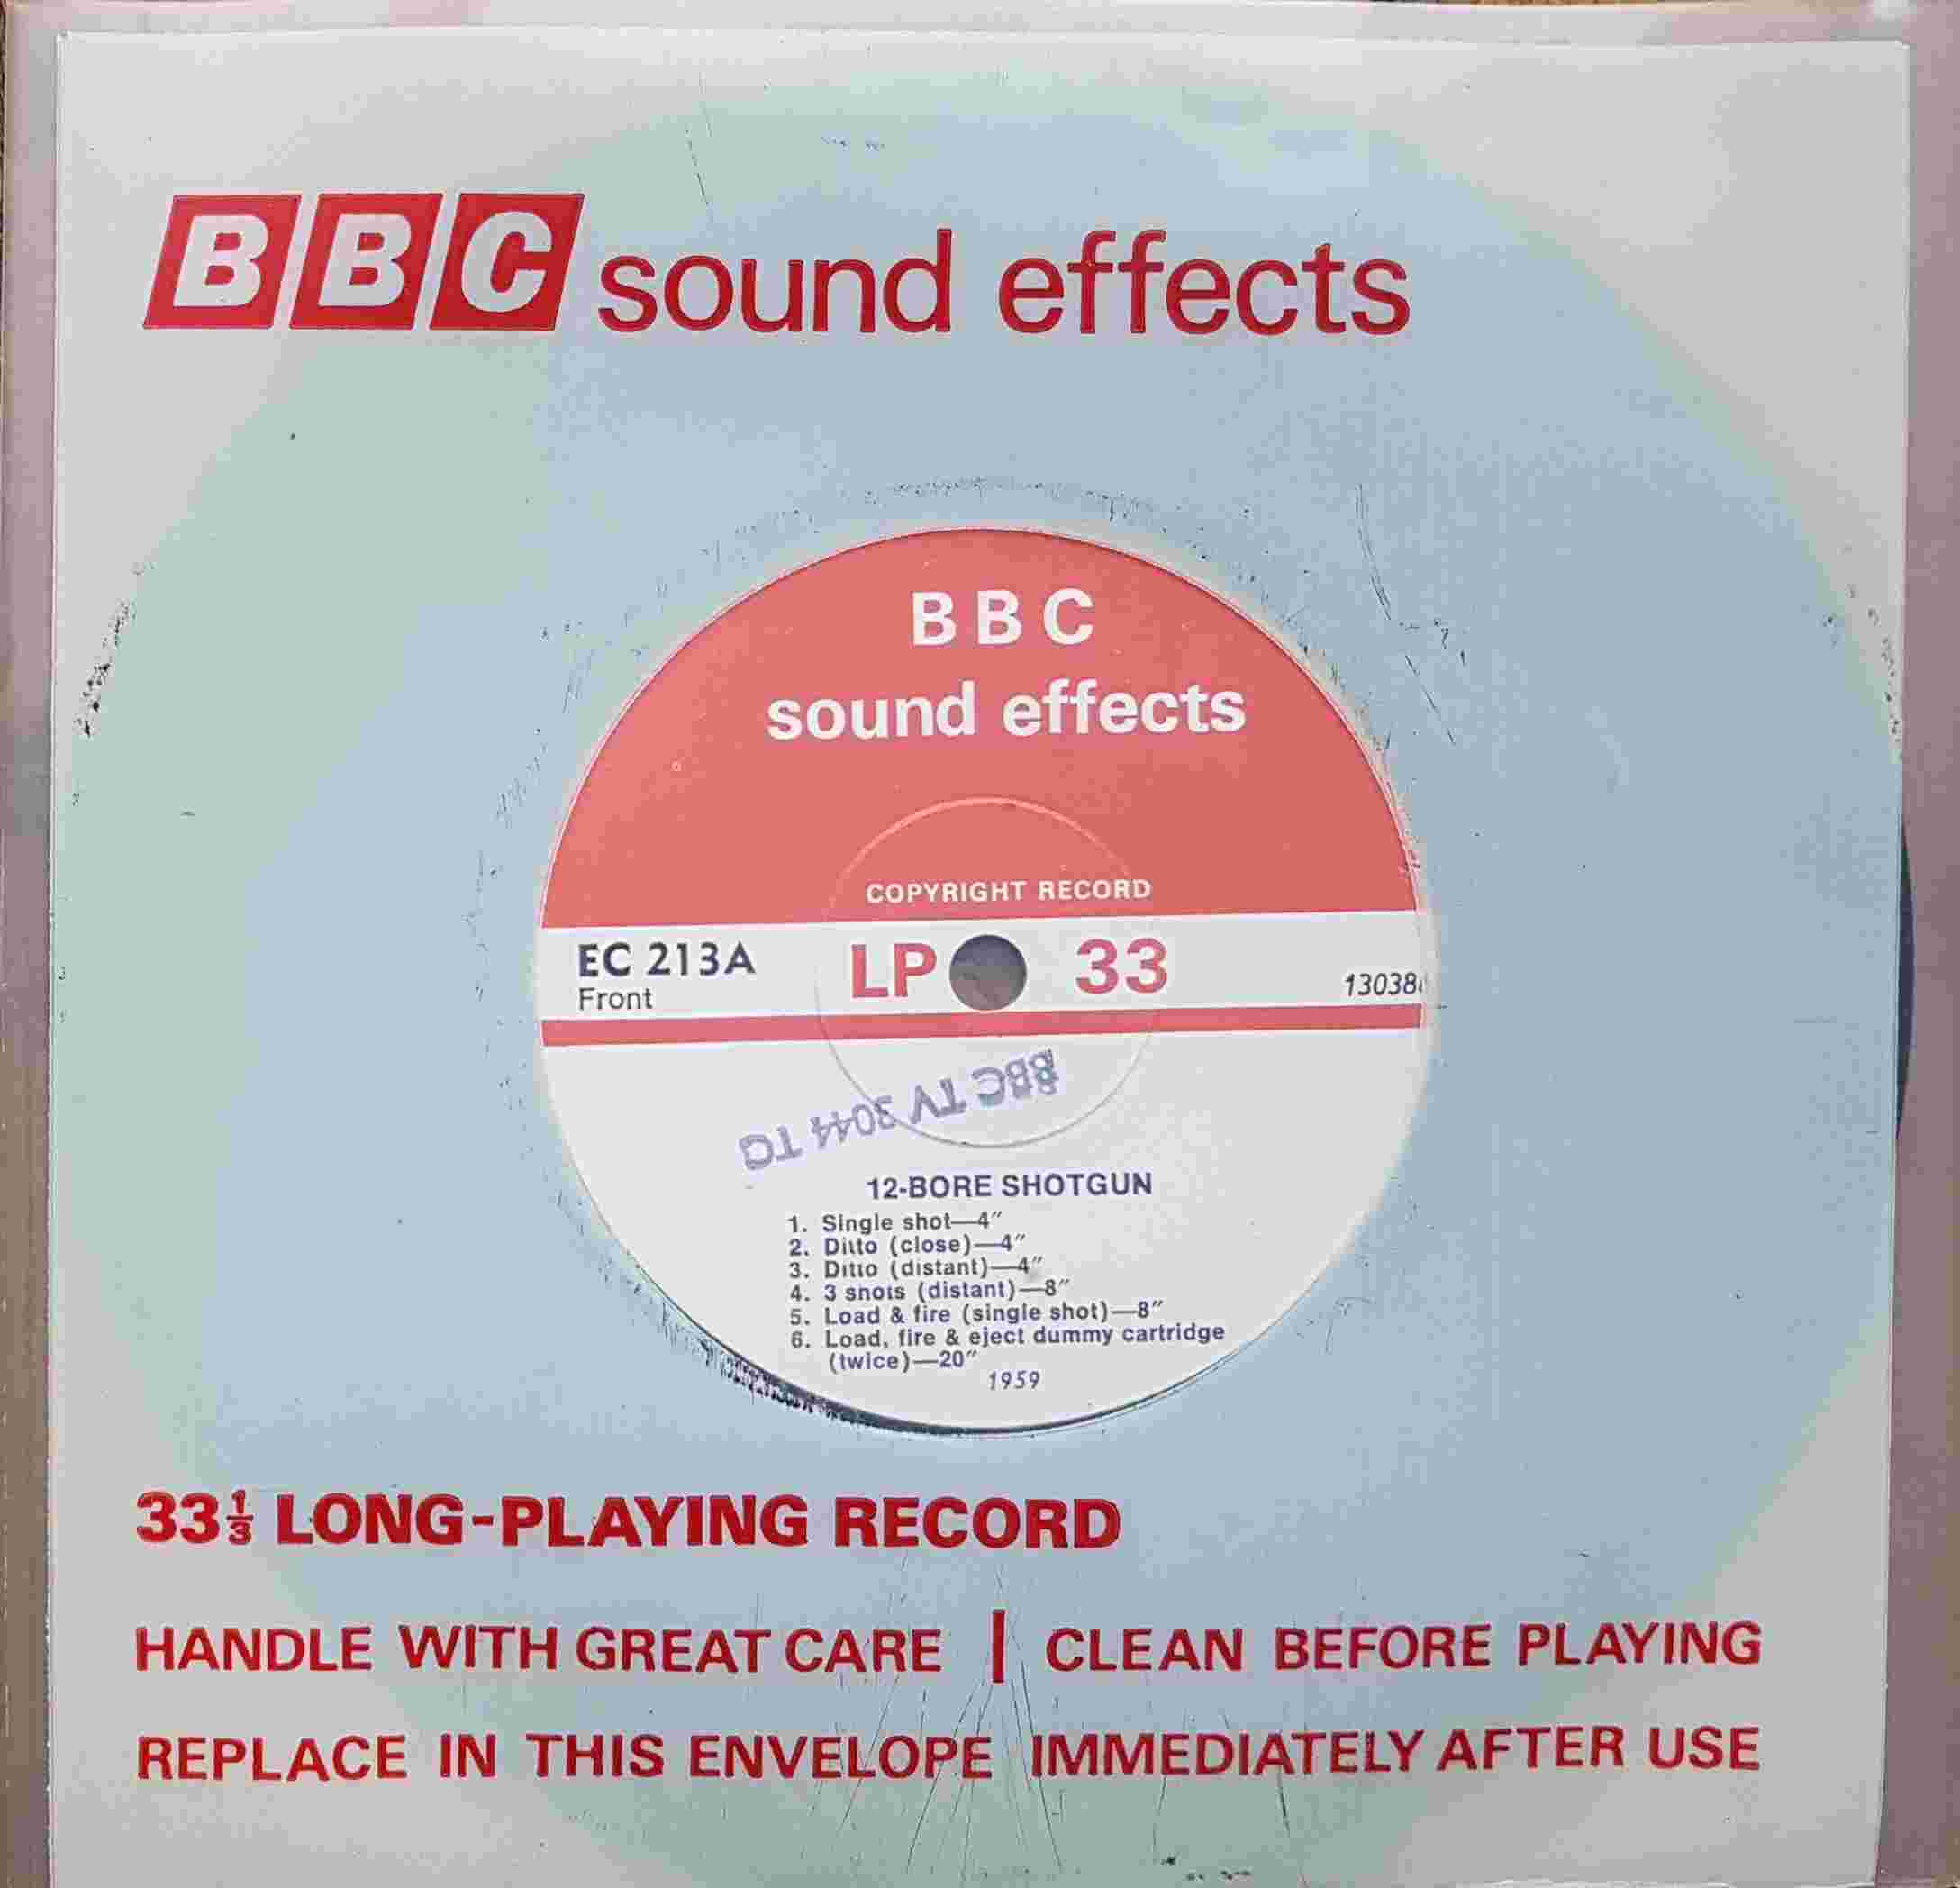 Picture of EC 213A Shotguns by artist Not registered from the BBC singles - Records and Tapes library